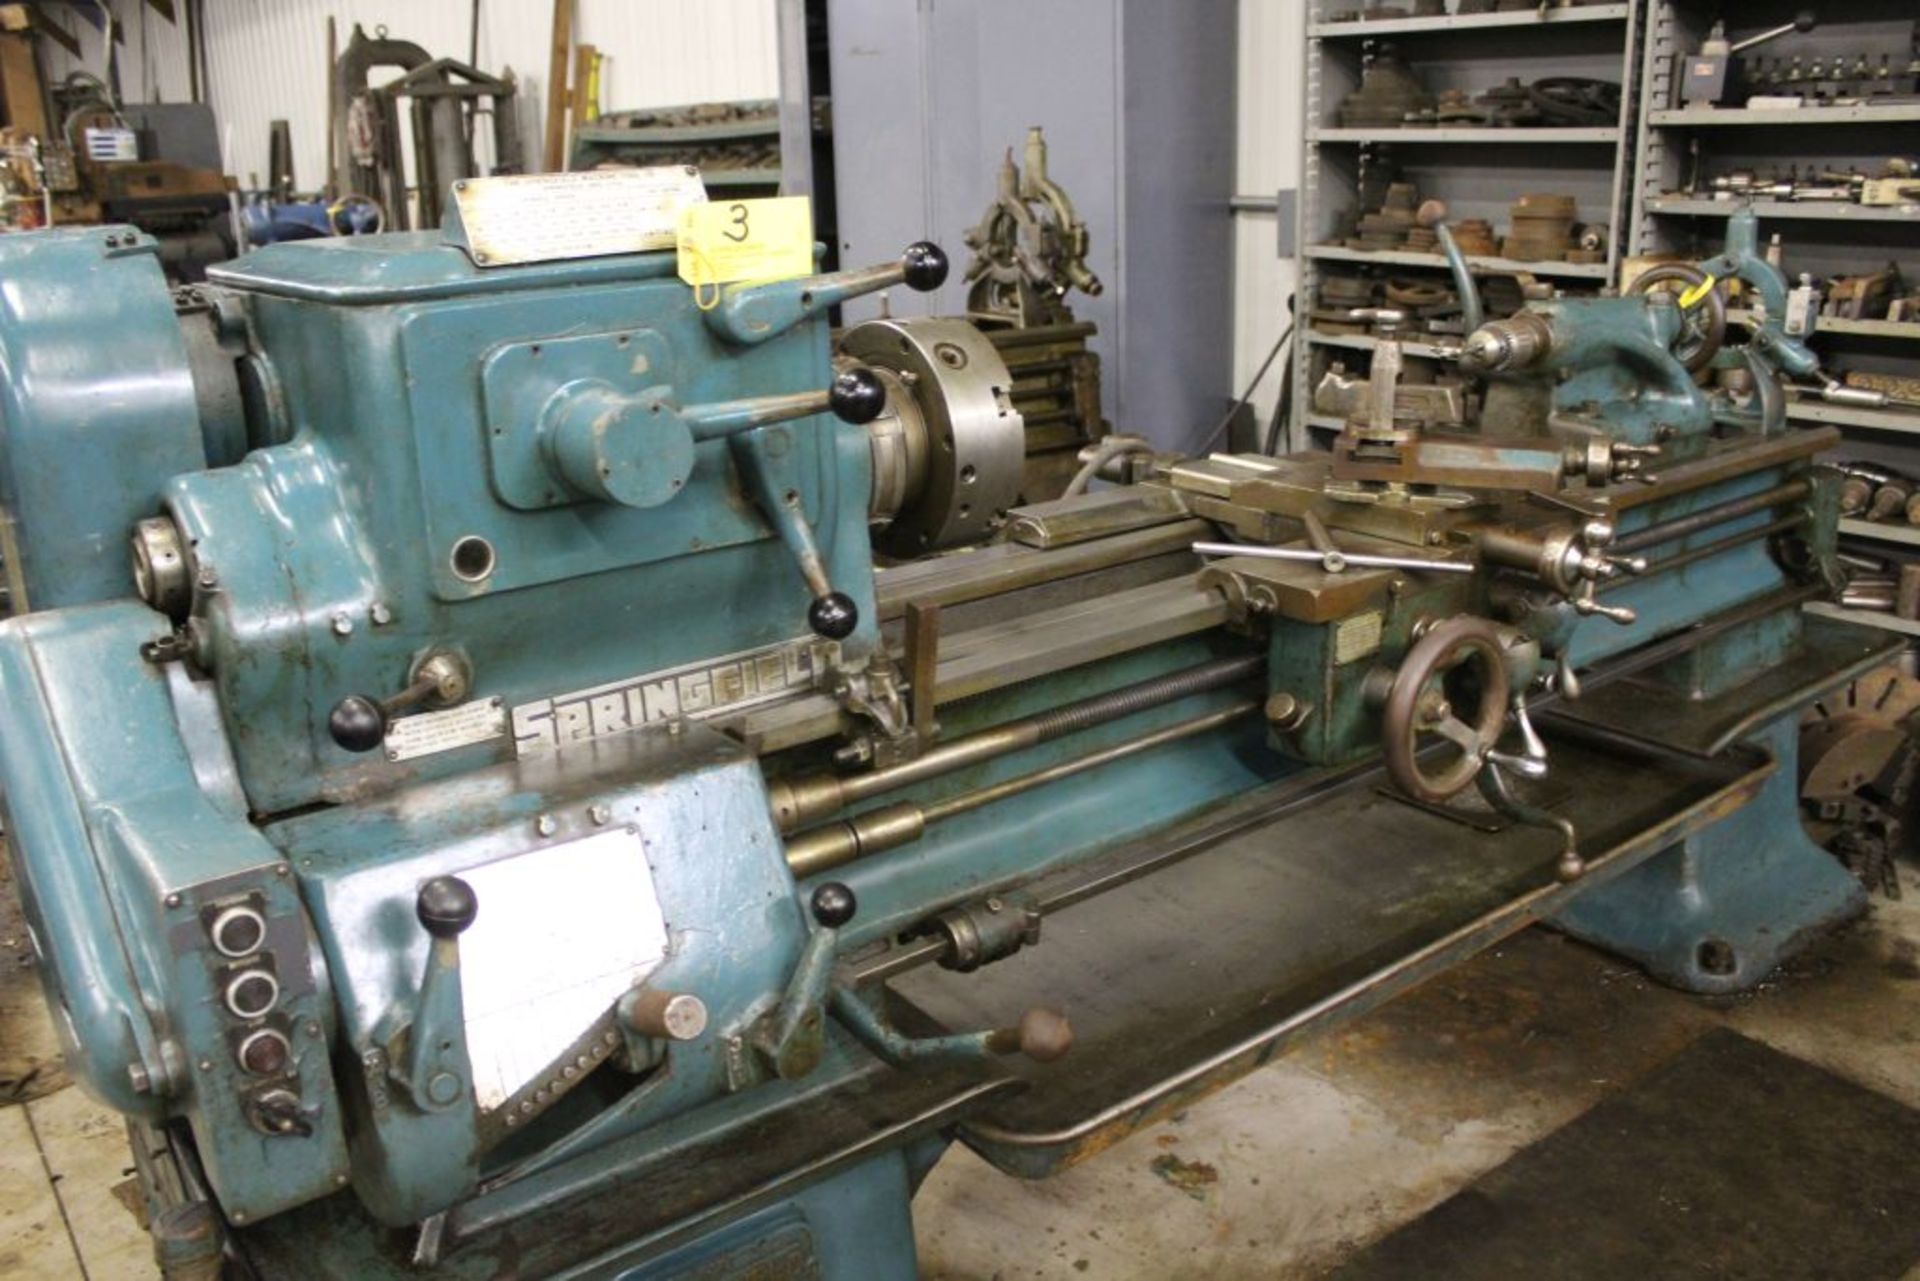 Springfield lathe, sn 52071, 14", 1 3/4" hole, 16" swing, 48" center to center, taper attachment, - Image 4 of 14